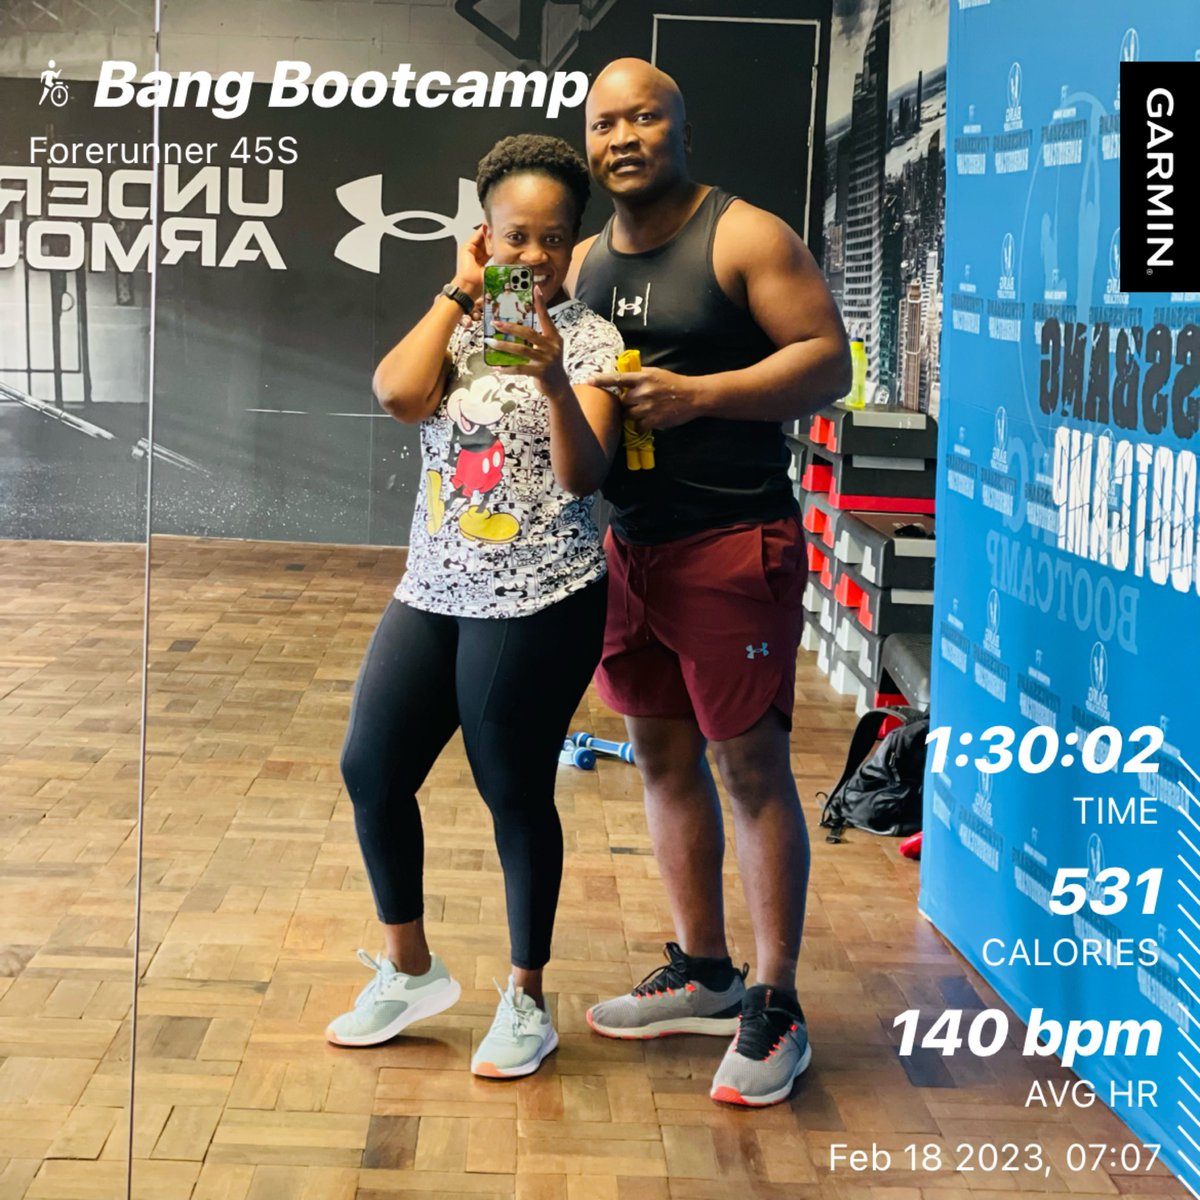 I love this space so 😍💪🏾🏋🏾‍♀️
#MevsMe 
#FitnessBang2023 
#FetchYourBody2023 
#TrainingWithTumiSole